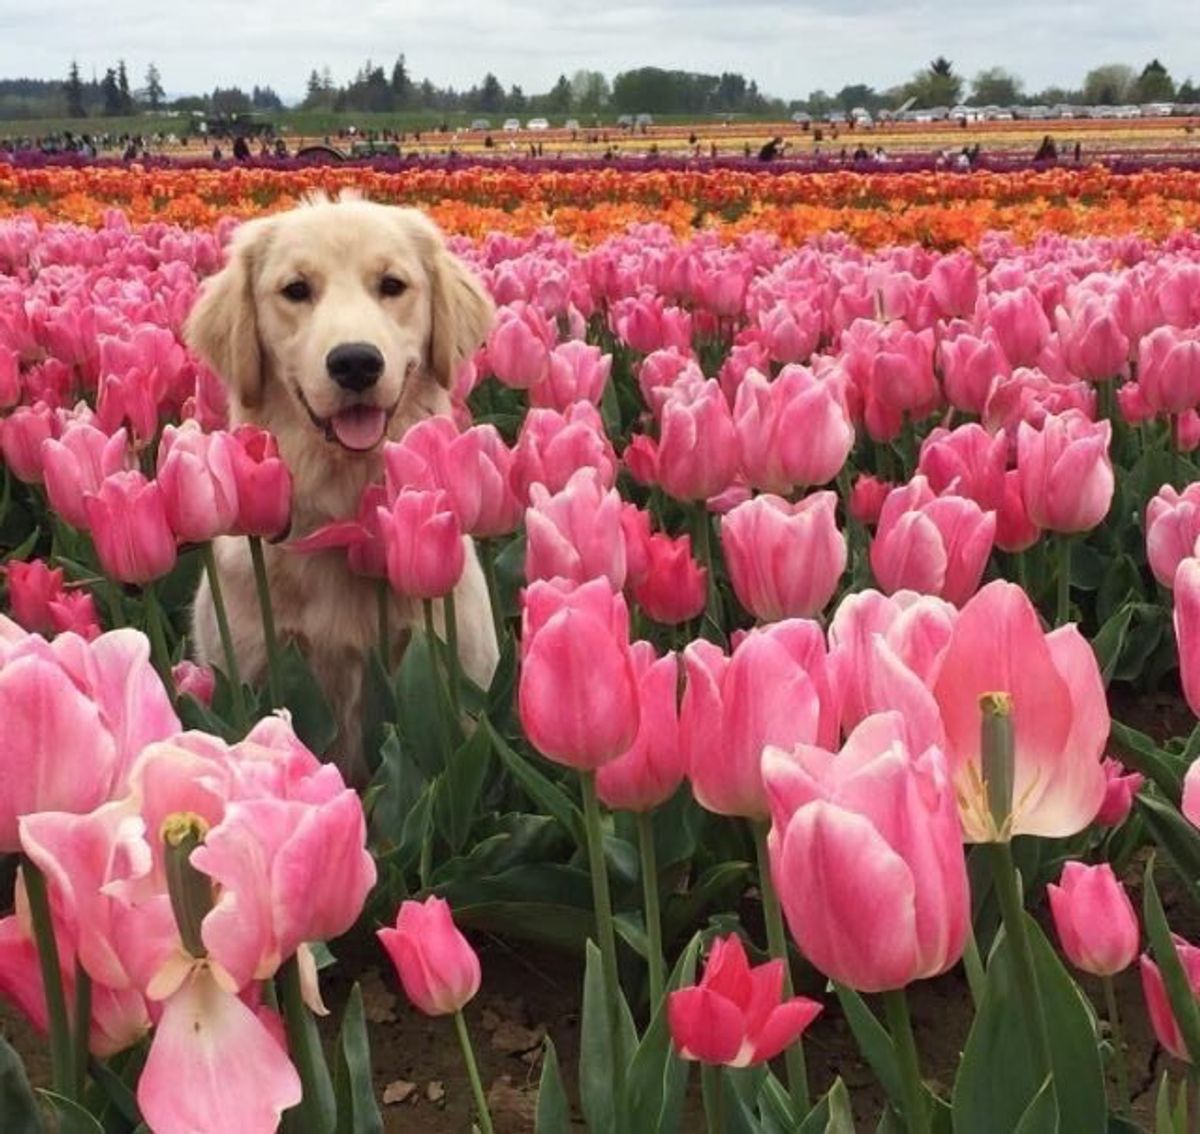 25 Pictures Of Dogs To Brighten Your Day